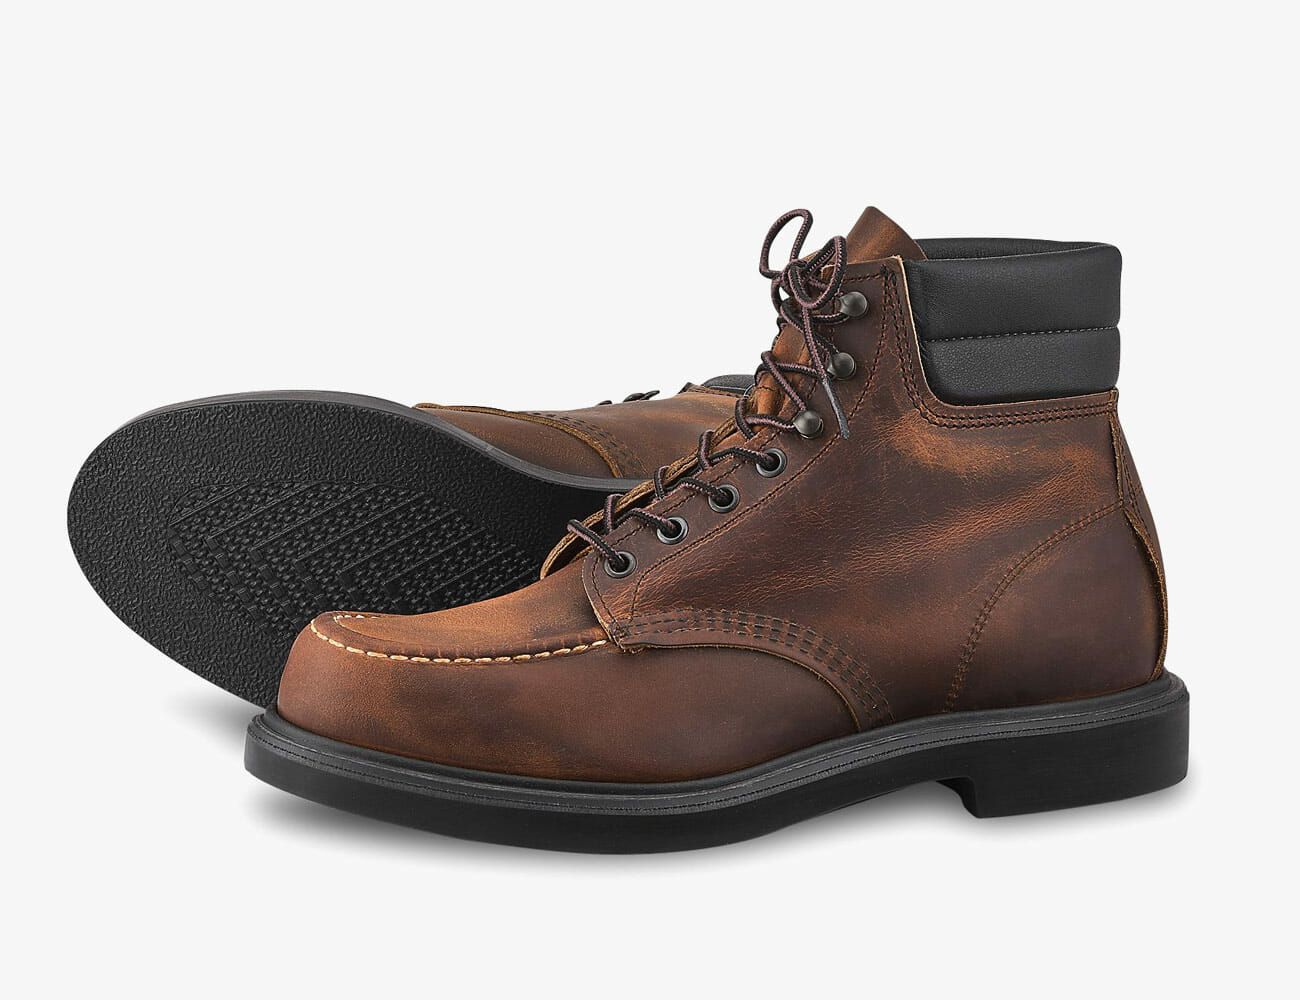 Red Wing Heritage Shoes and Boots 